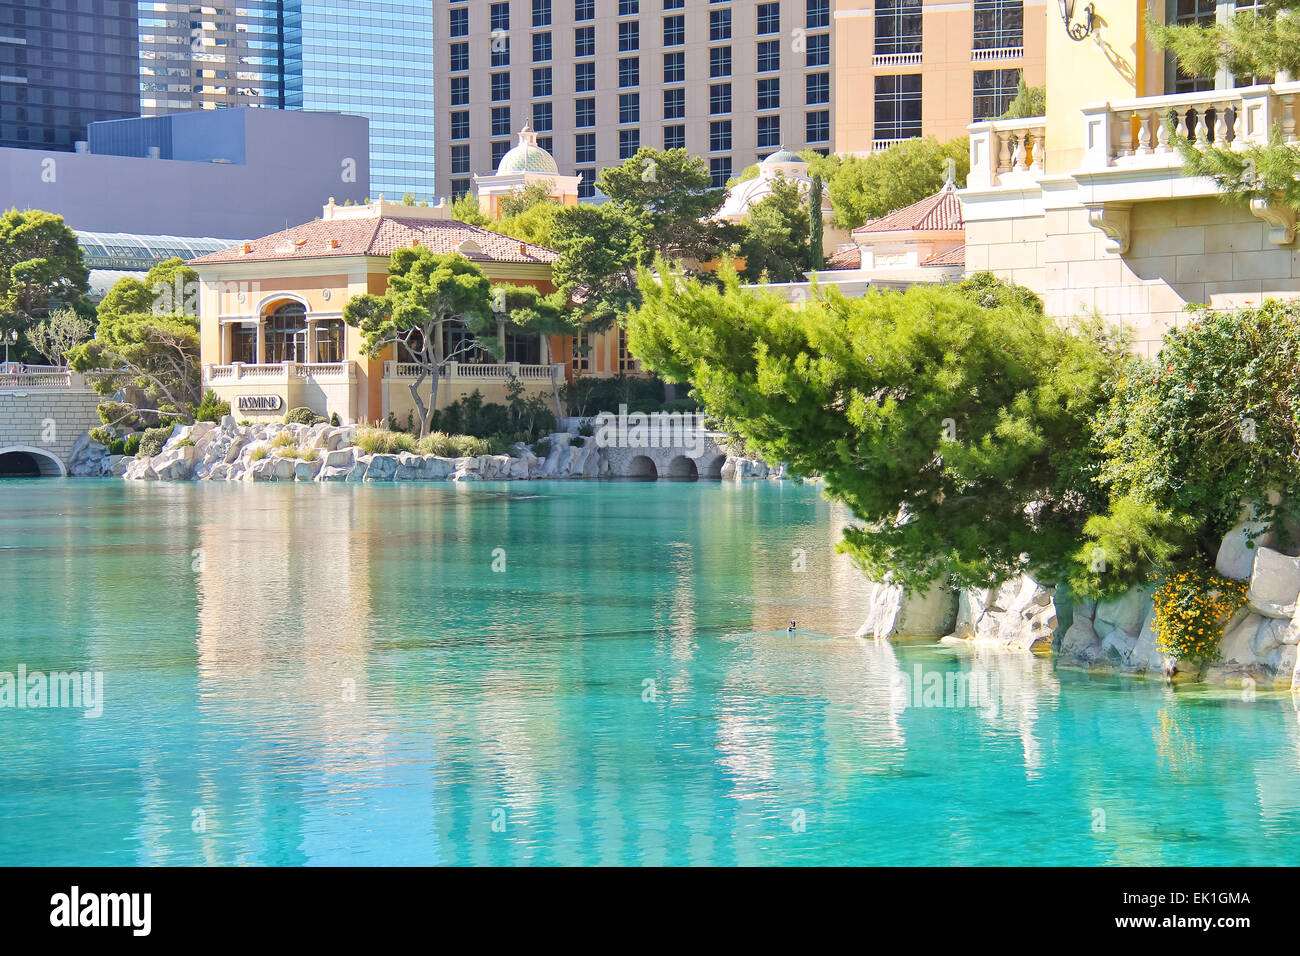 LAS VEGAS, NEVADA, USA - OCTOBER 21, 2013 : Fountain in Bellagio Hotel in Las Vegas, Bellagio Hotel and Casino opened in 1998. This luxury hotel owned by MGM Resorts International Stock Photo